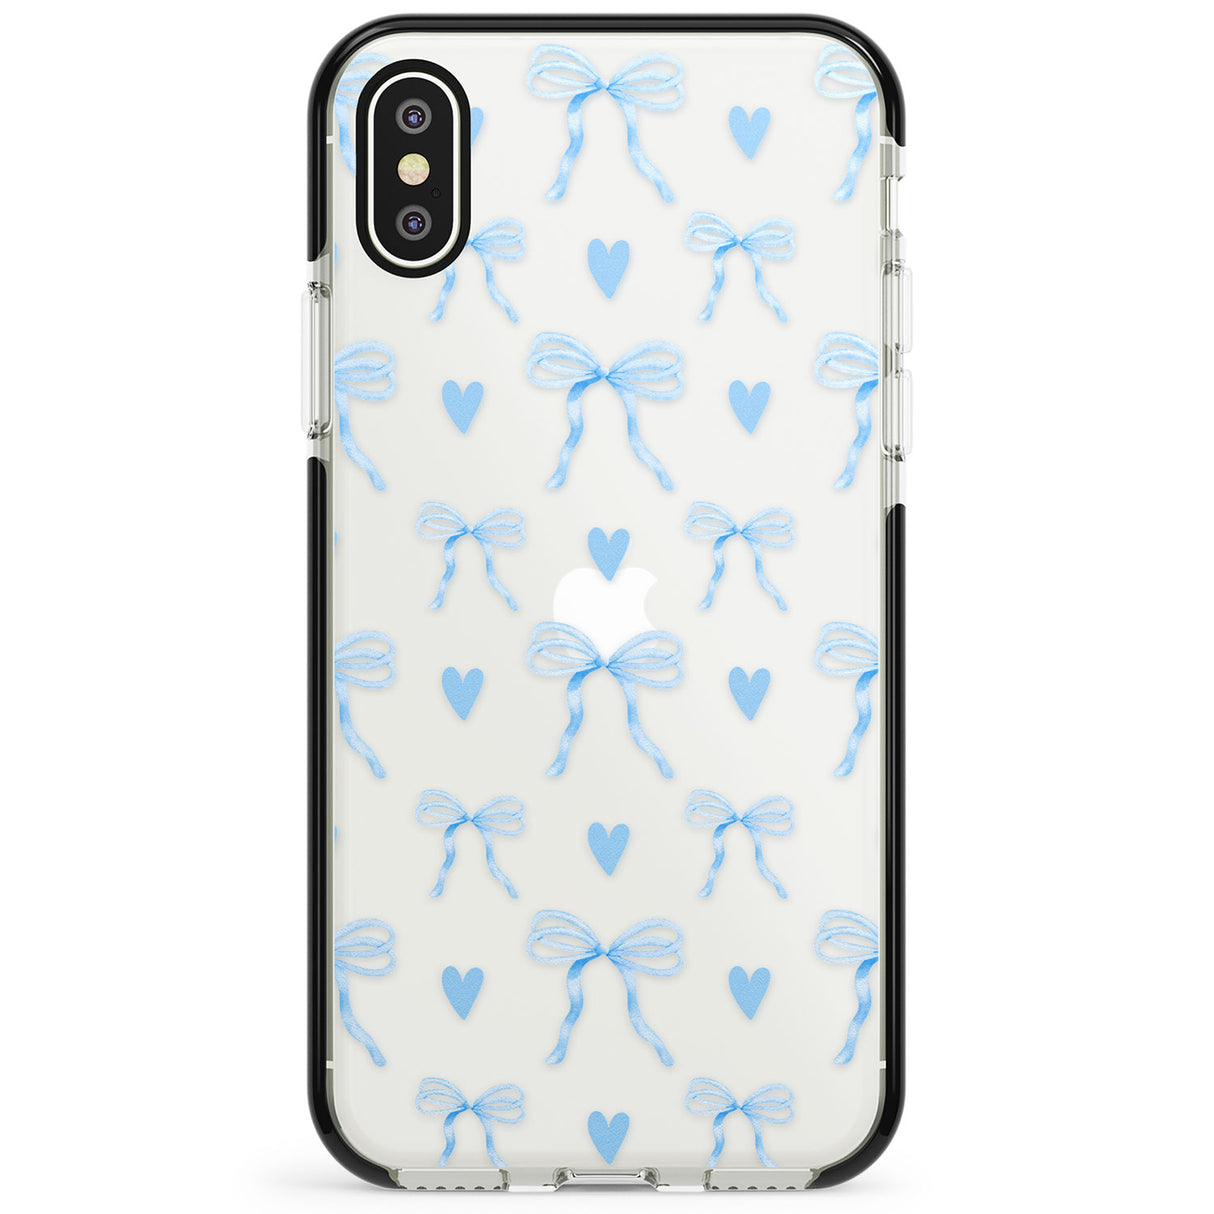 Blue Bows & Hearts Phone Case for iPhone X XS Max XR